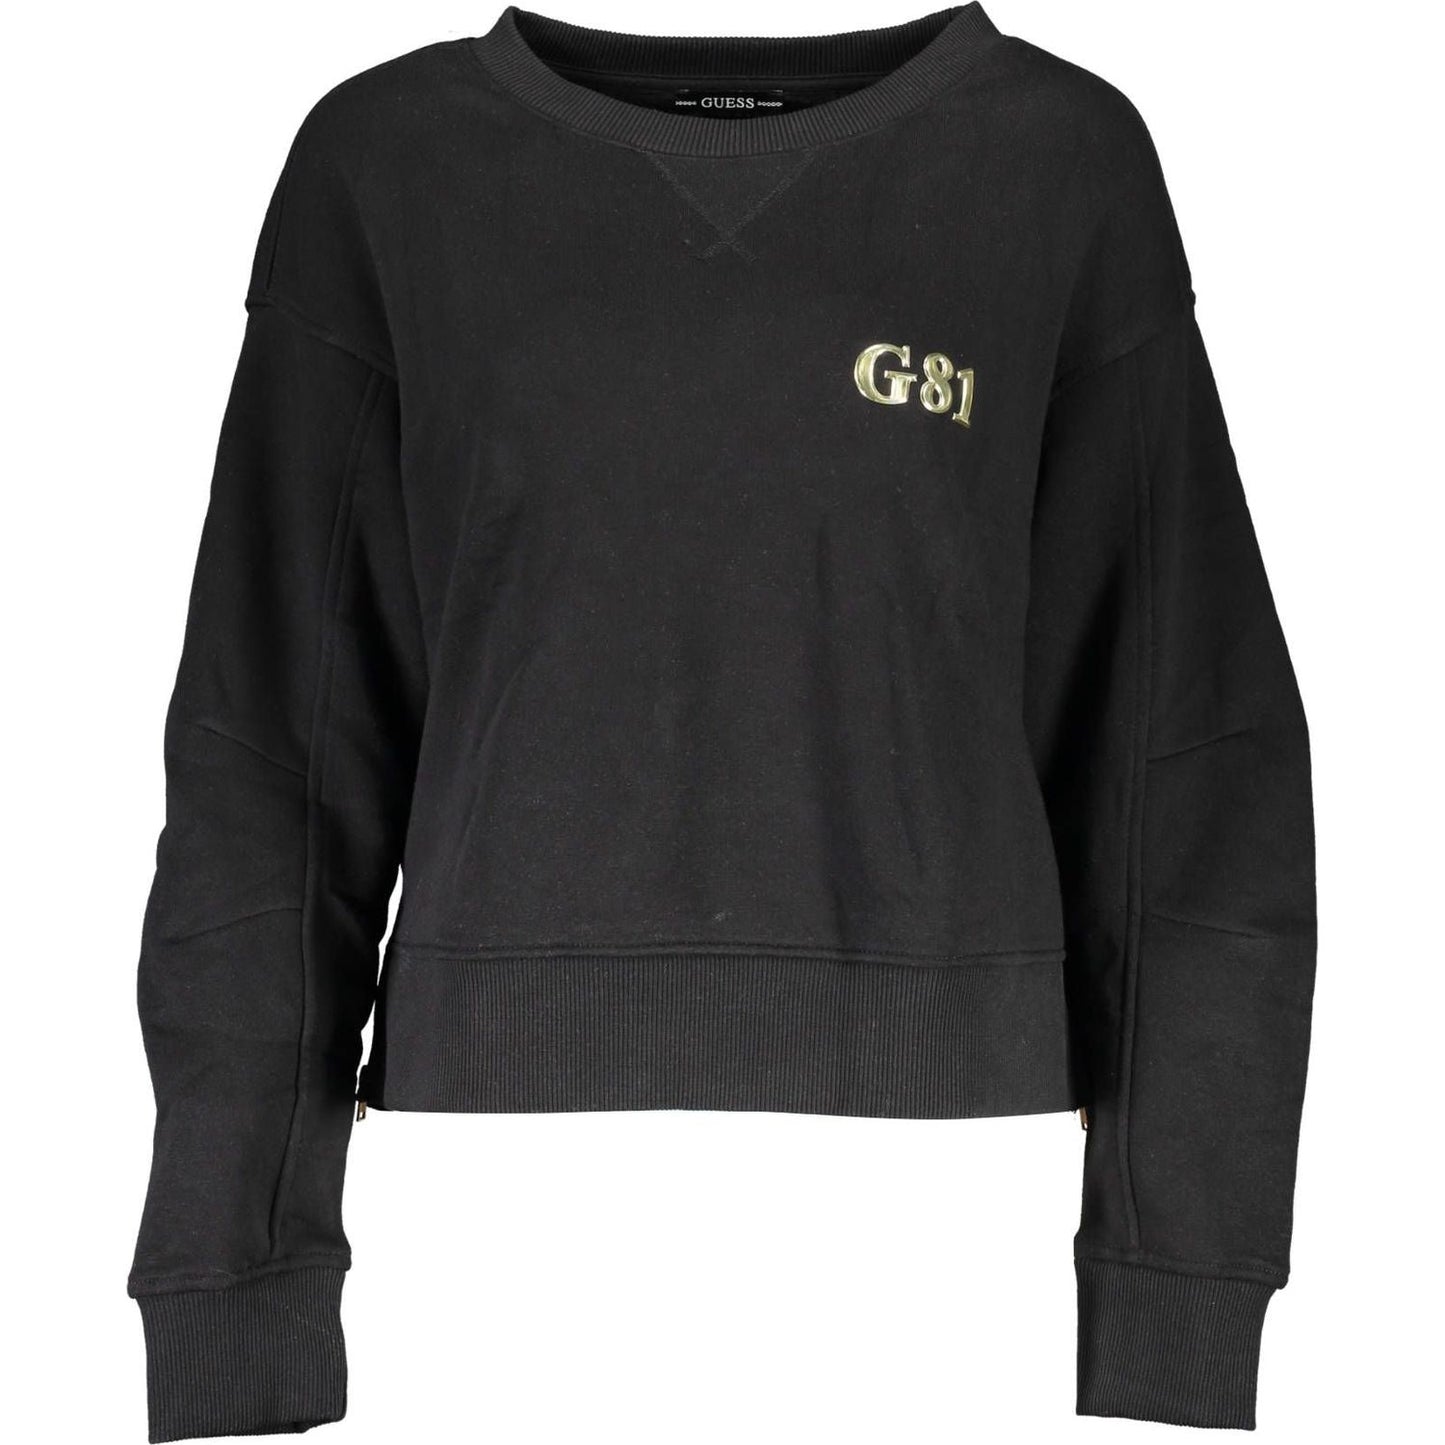 Guess JeansElegant Long-Sleeved Sweater with Chic Side ZipsMcRichard Designer Brands£99.00